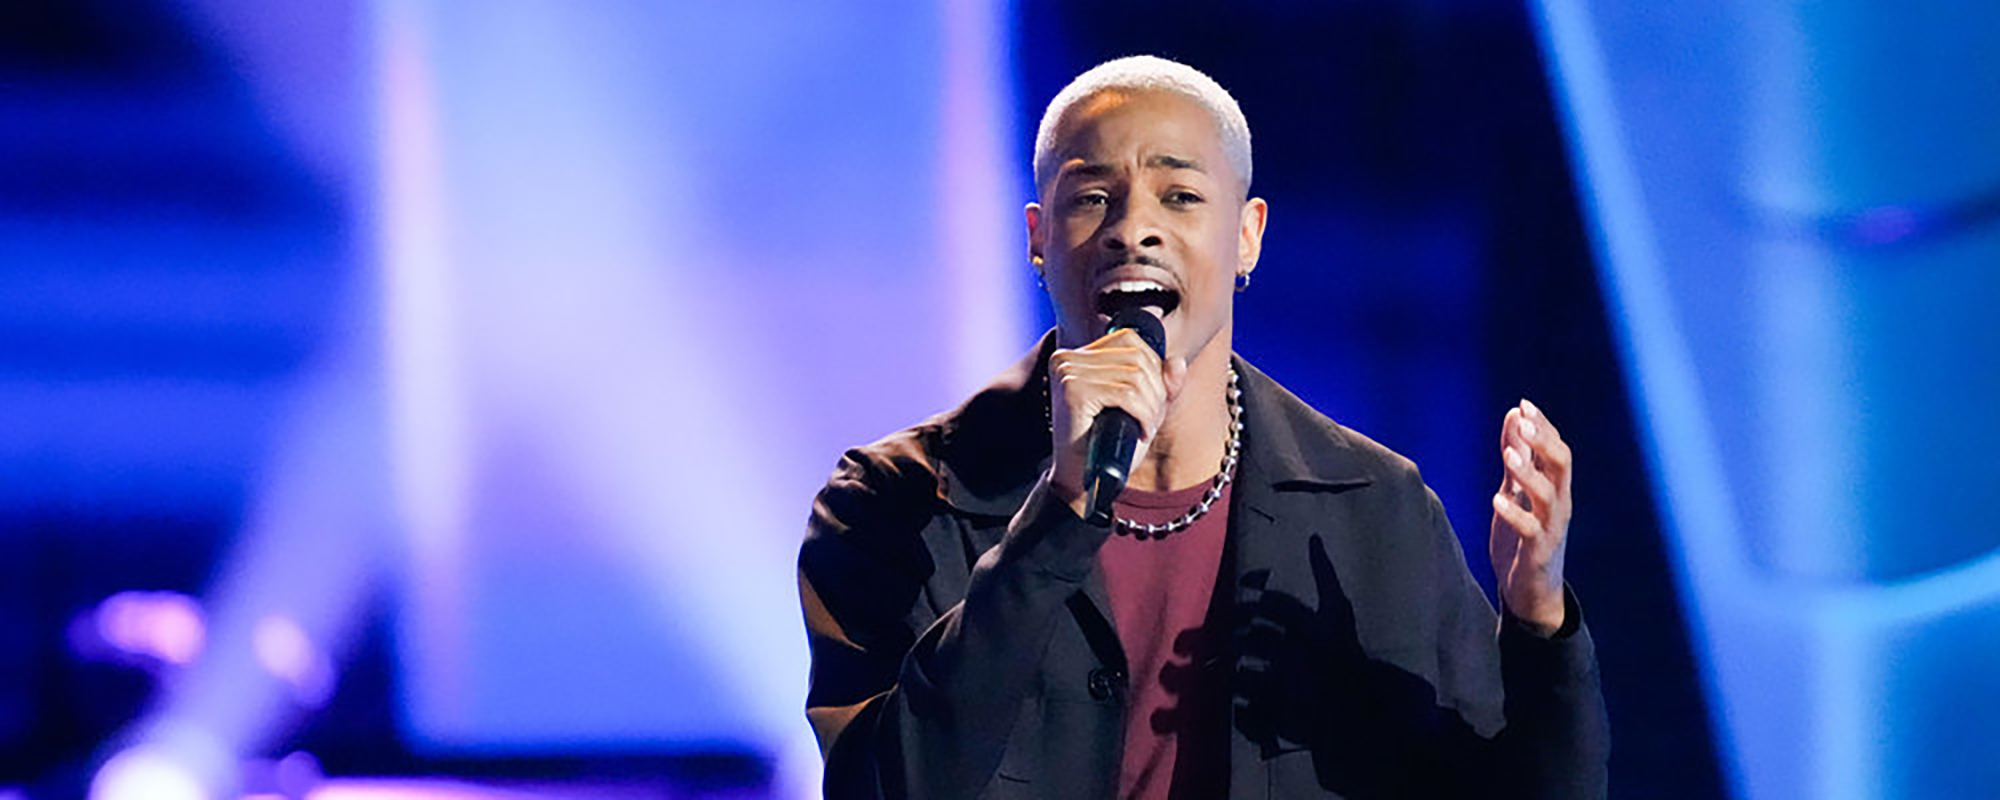 Brandon Montel’s Smooth Vocals Earn Him a Slot on ‘The Voice’